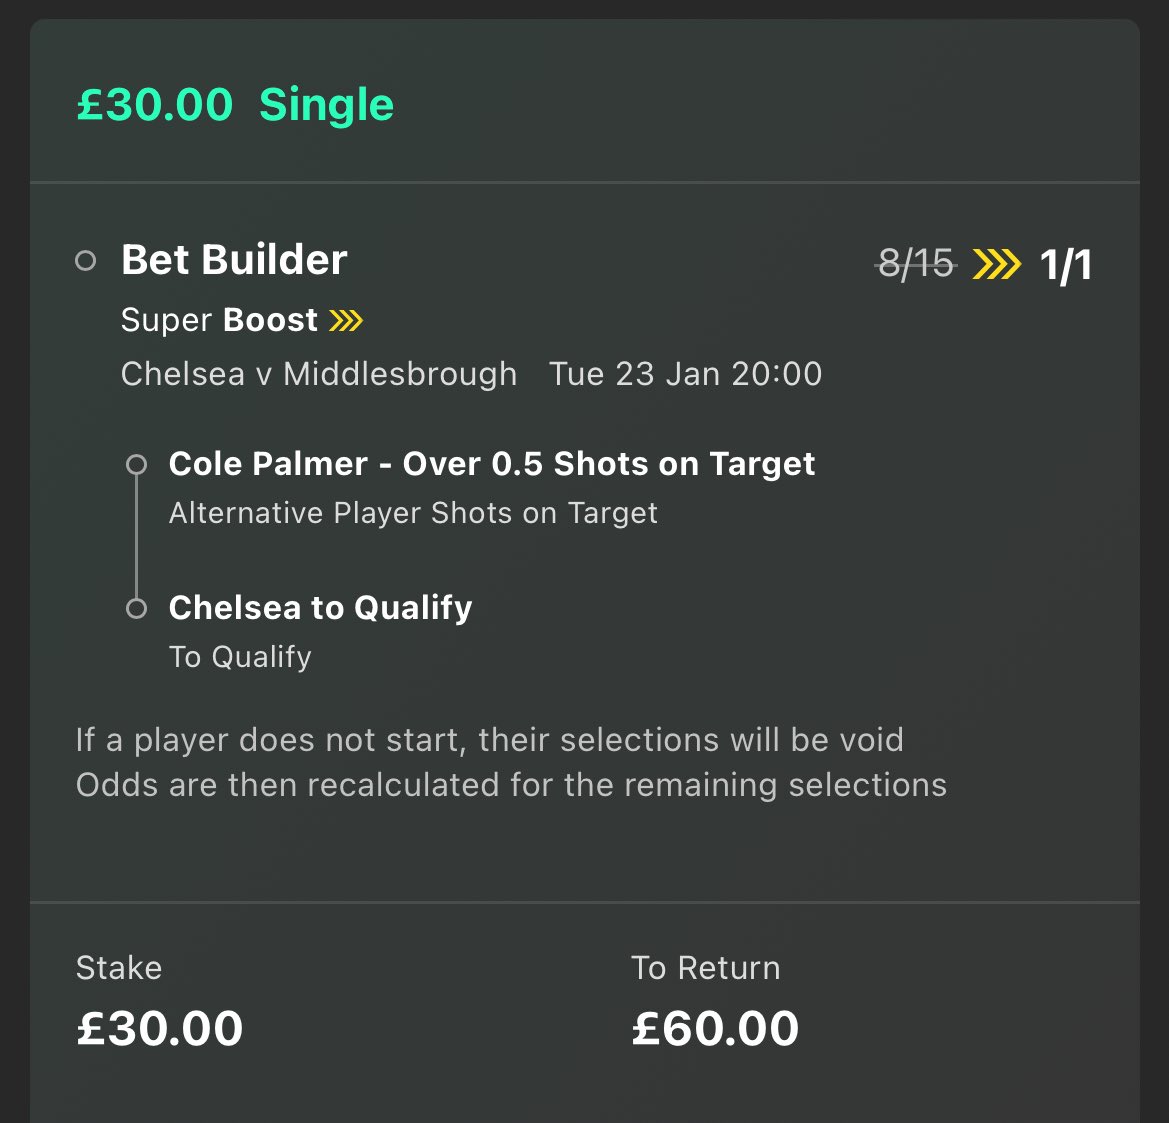 😍 F*ck it… £60 cash giveaway! If the Chelsea vs Middlesbrough super boost wins, we’ll give away £60 cash! 👉 £30 to someone who LIKES this tweet. 👉 £30 to someone who RETWEETS this tweet. Must be following us. Ready? Go!